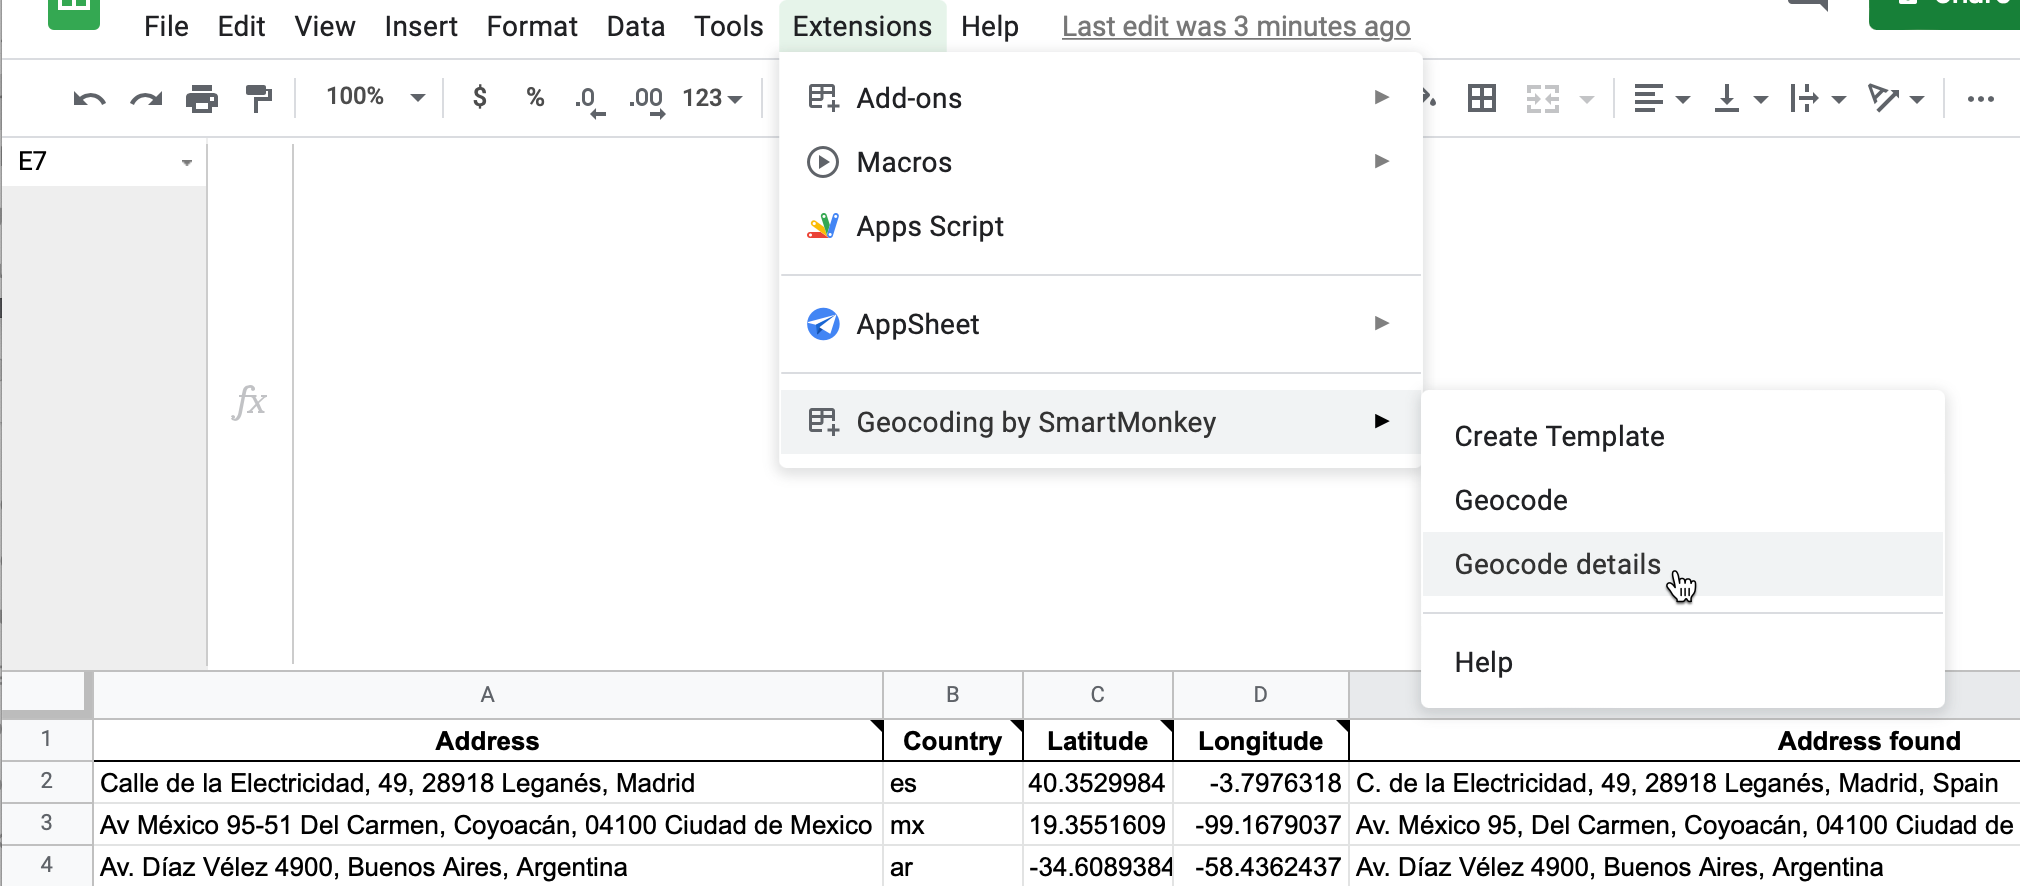 Select Extensions–Geocoding by SmartMonkey–Geocode Details to display sample data with results for three new columns: Latitude, Longitude, and Address found.